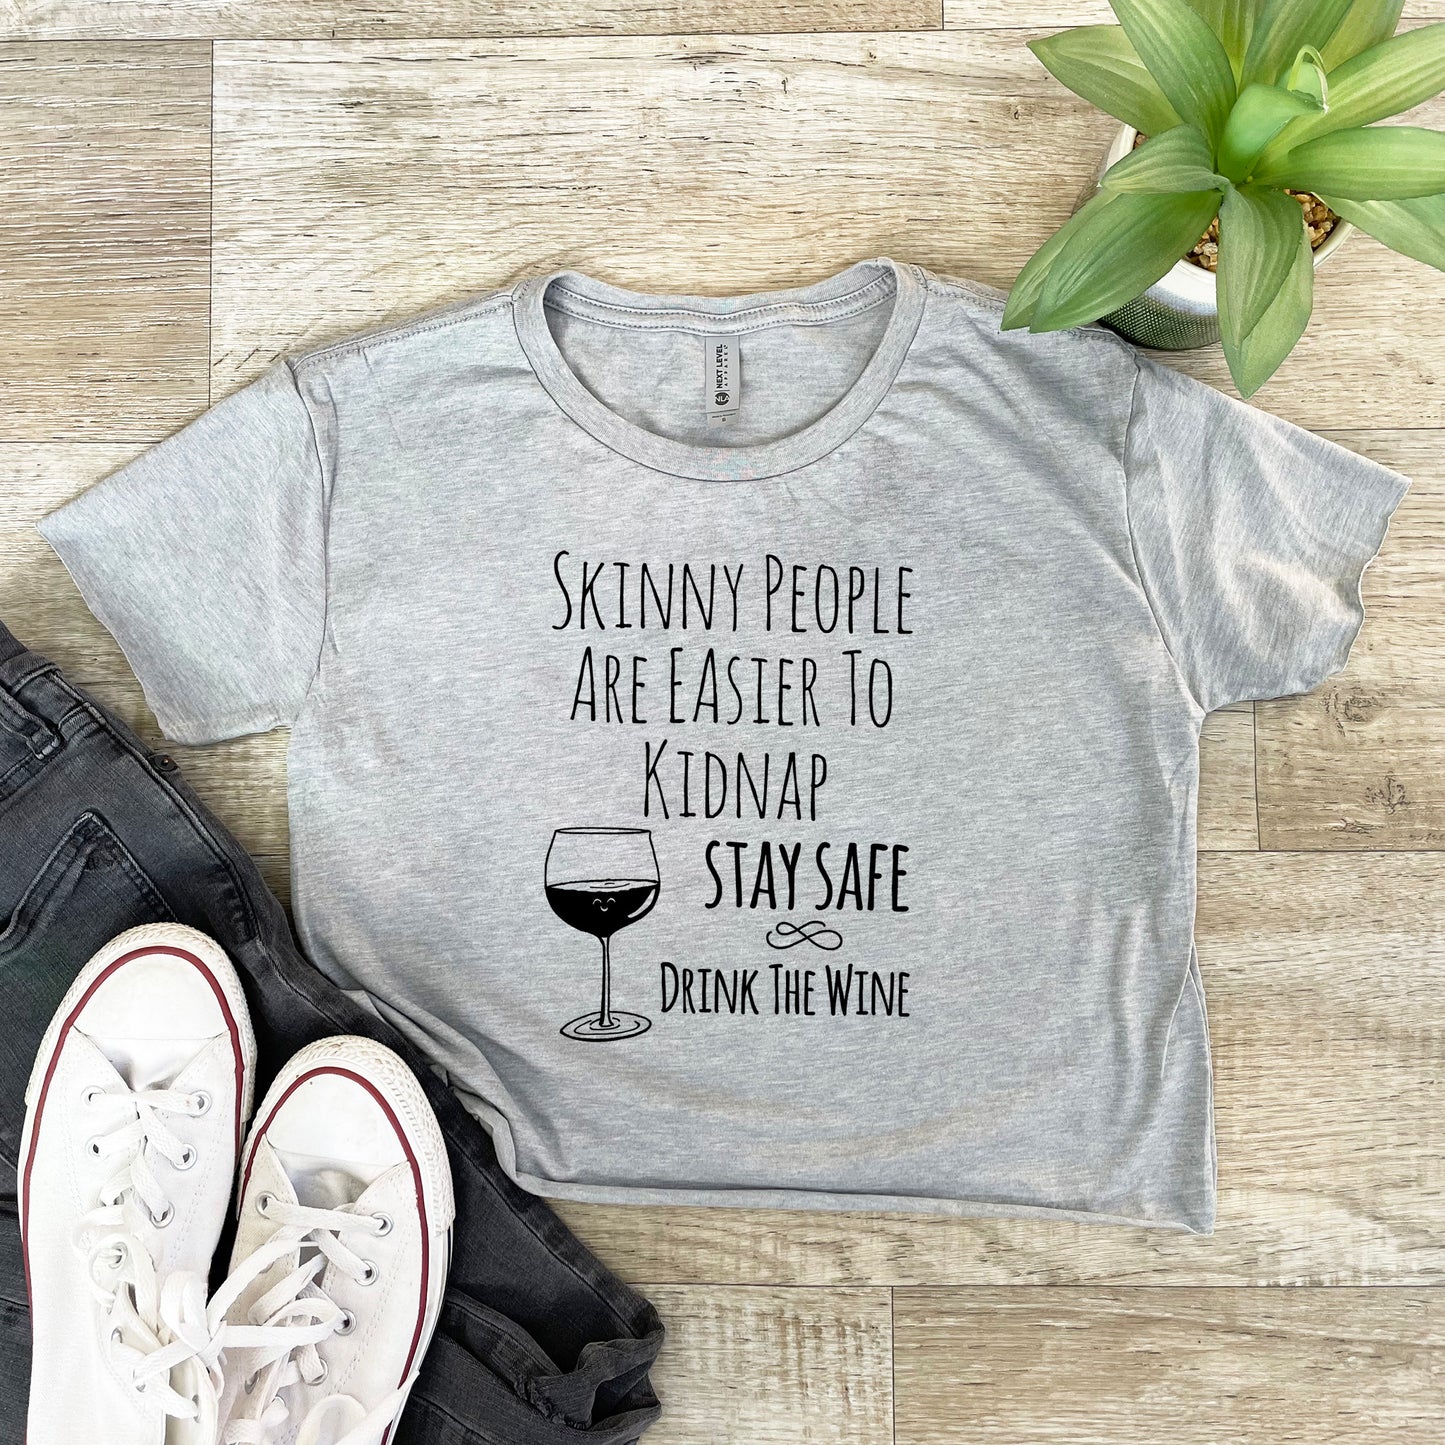 Skinny People Are Easier To Kidnap. Stay Safe. Drink The Wine - Women's Crop Tee - Heather Gray or Gold